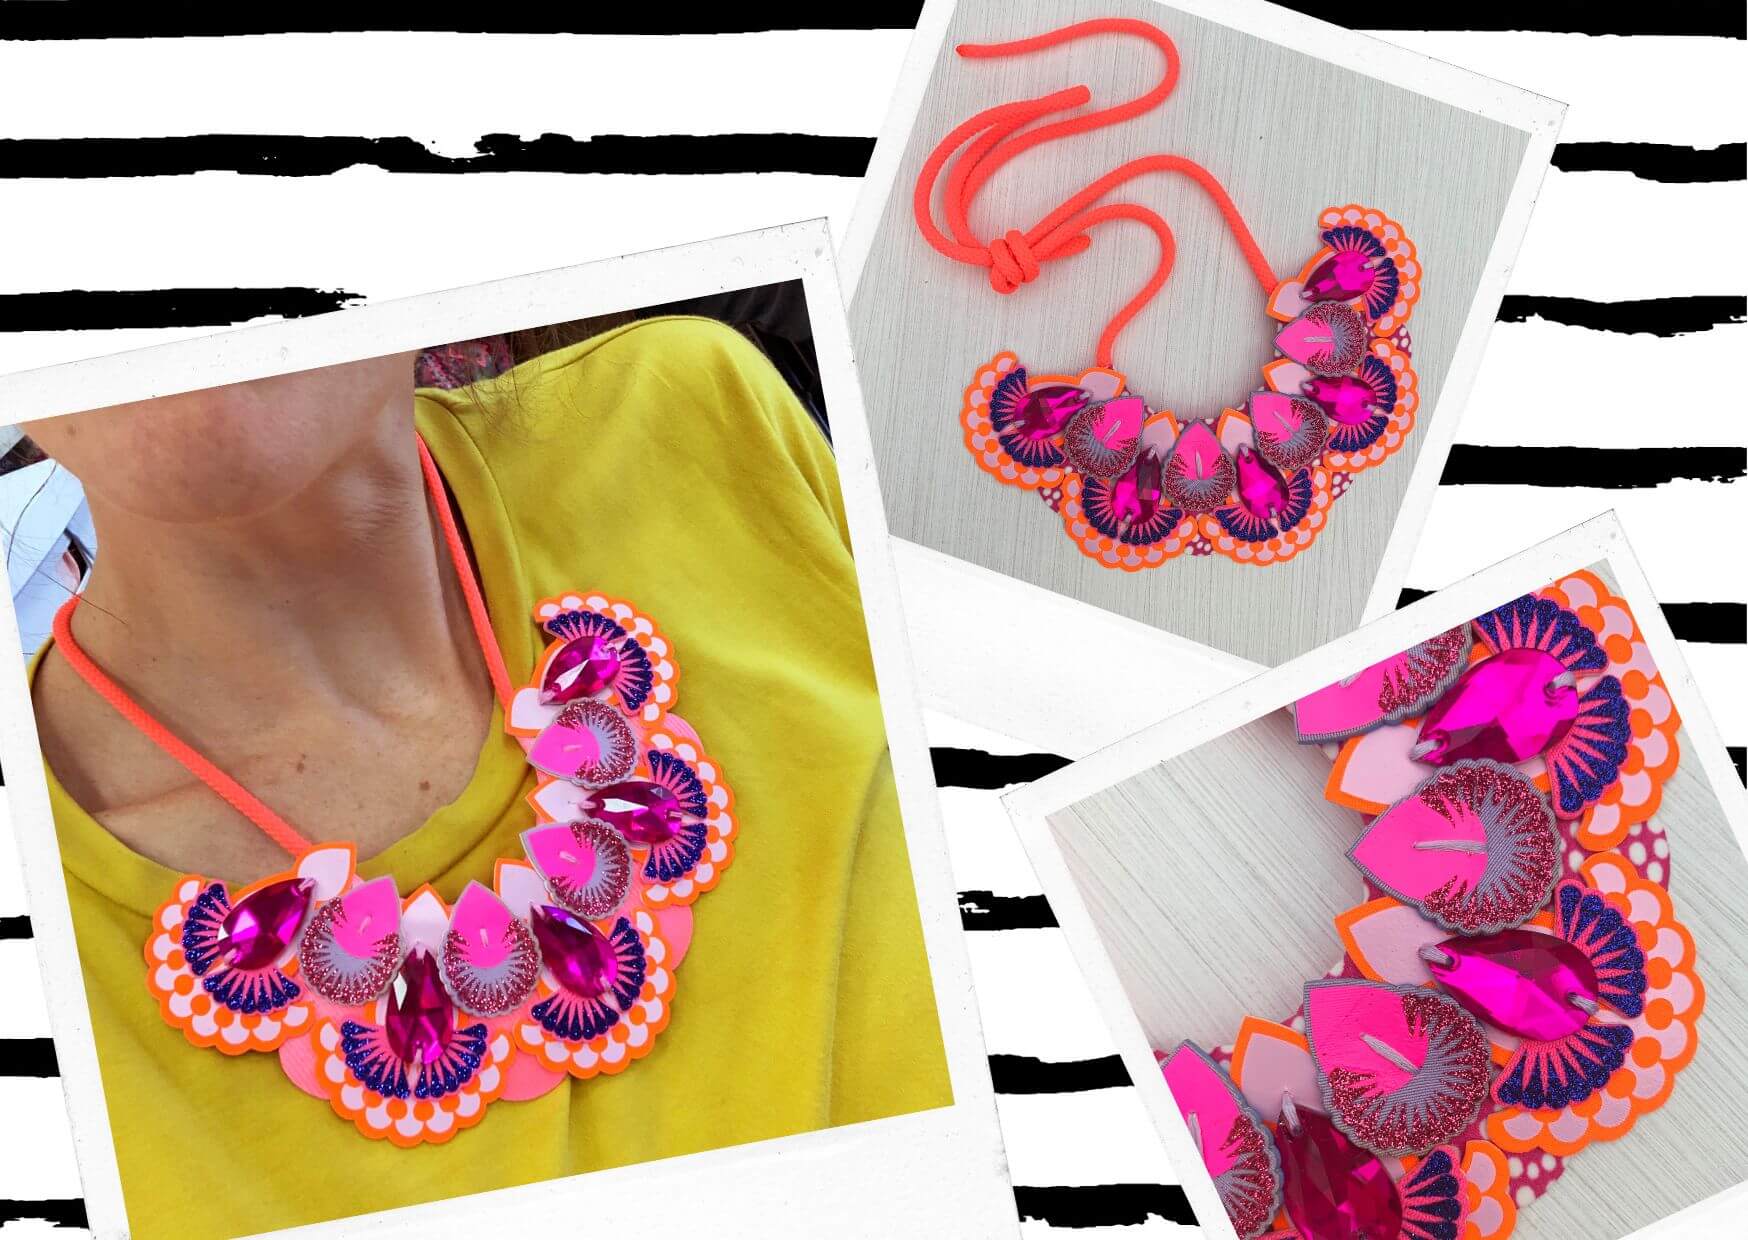 Three polaroids are scattered at jaunty angles on a white background with black hand drawn looking stripes. All three images are of a bright pink and orange statement bib necklace with pink jewels. In one image the necklace is being worn by a woman in a bright yellow t-shirt.